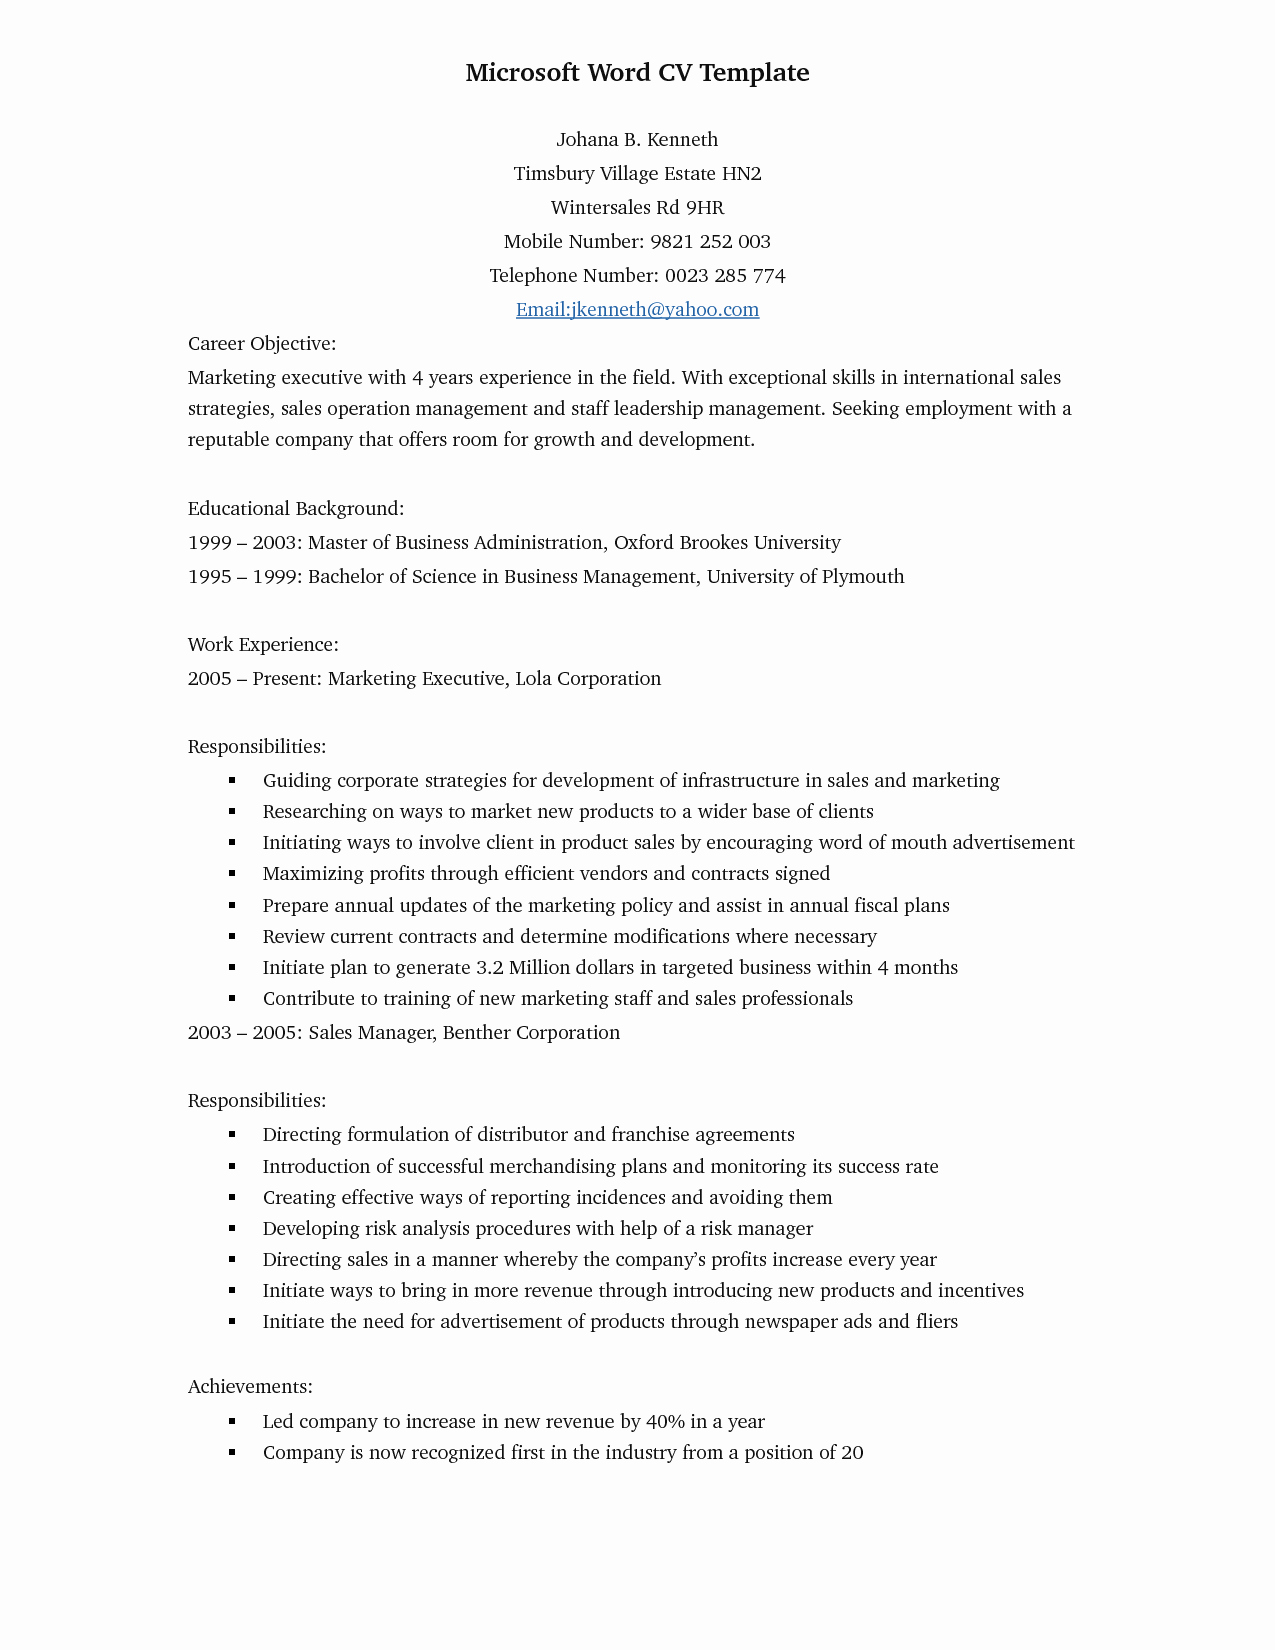 Resume Templates On Word 2007 New Cv Template Word 2007 Uk